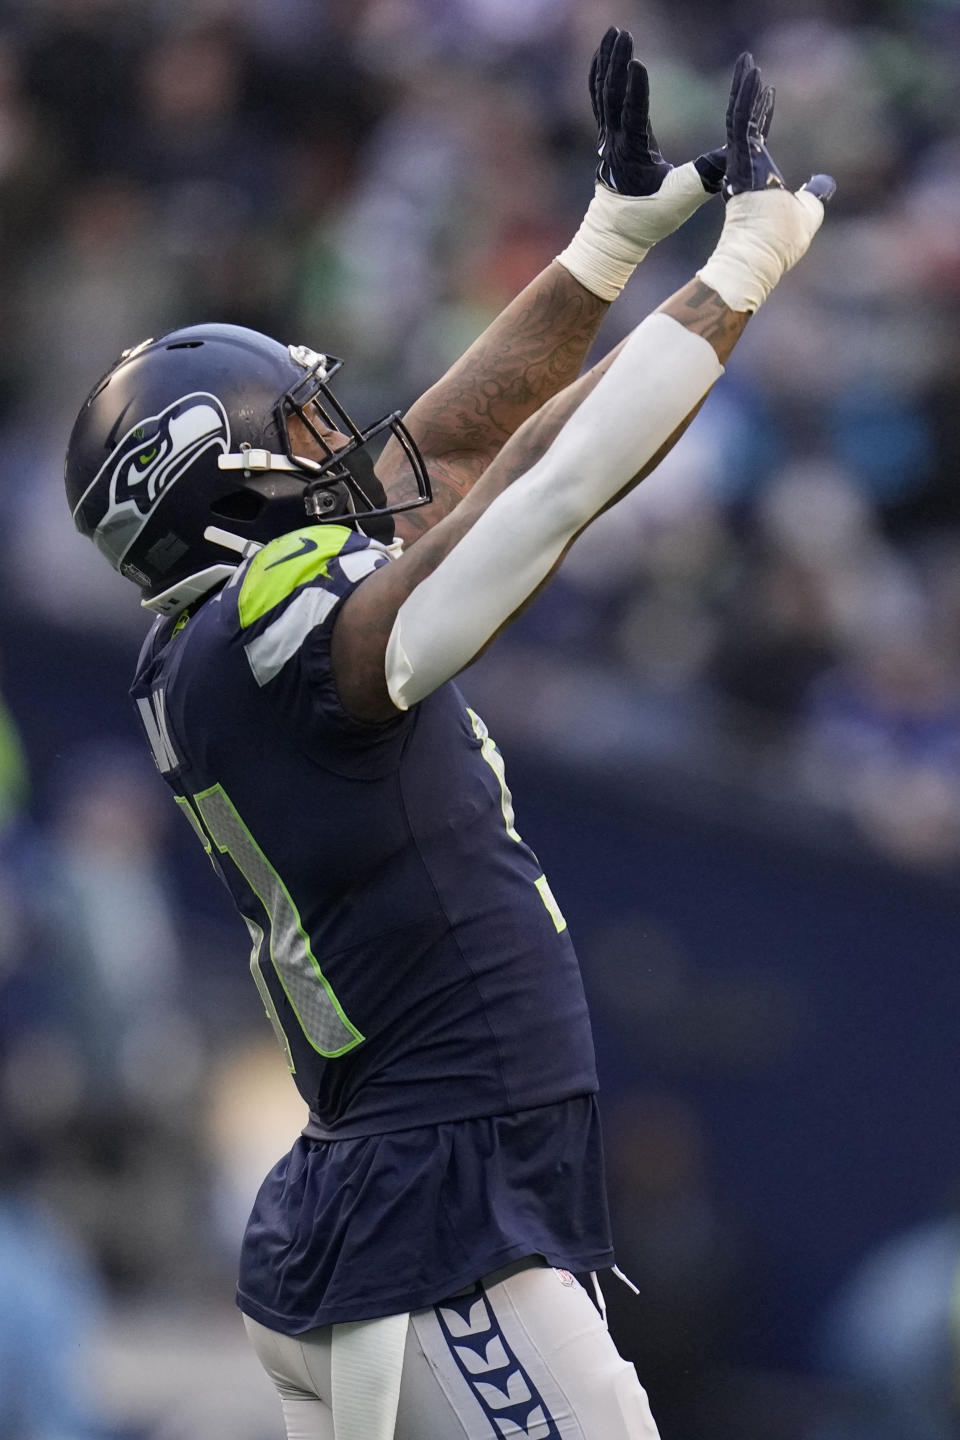 Seattle Seahawks linebacker Bruce Irvin (51) celebrates during the first half of an NFL football game against the Carolina Panthers, Sunday, Dec. 11, 2022, in Seattle. (AP Photo/Gregory Bull)